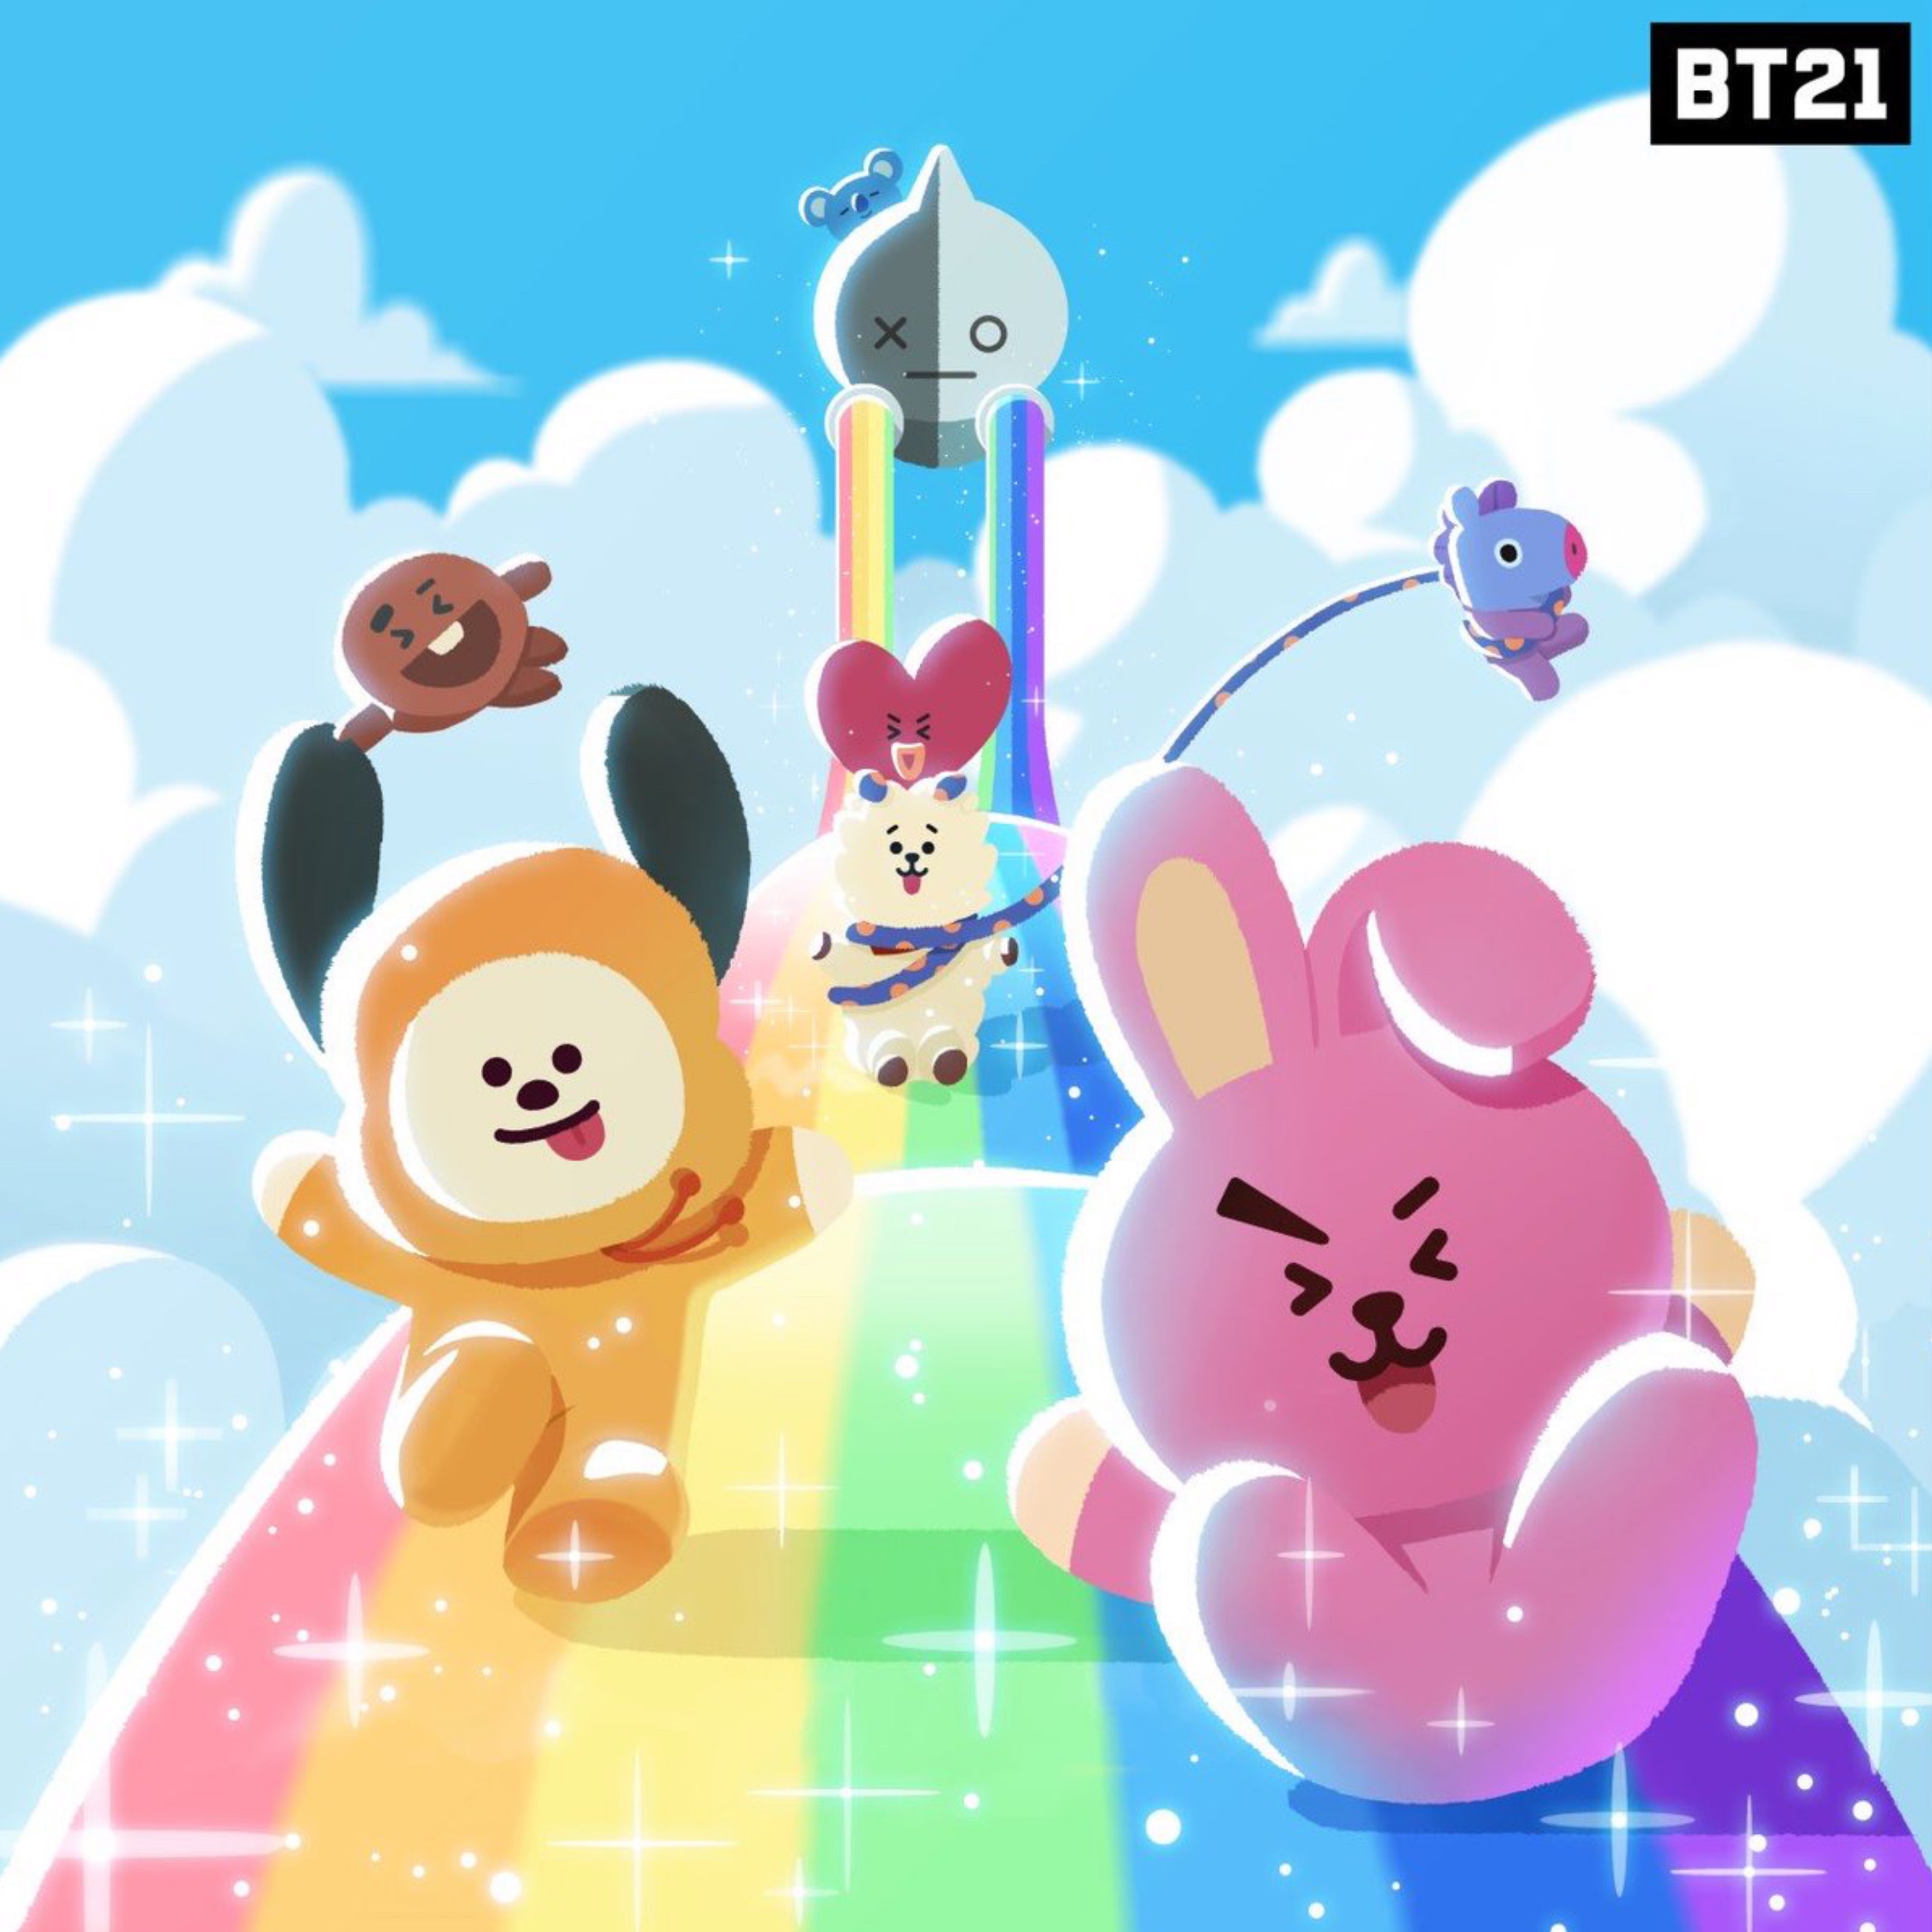 This visual is about bts bt21 cooky chimmy chooky #bts #bt21 #cooky #chimmy #choo...